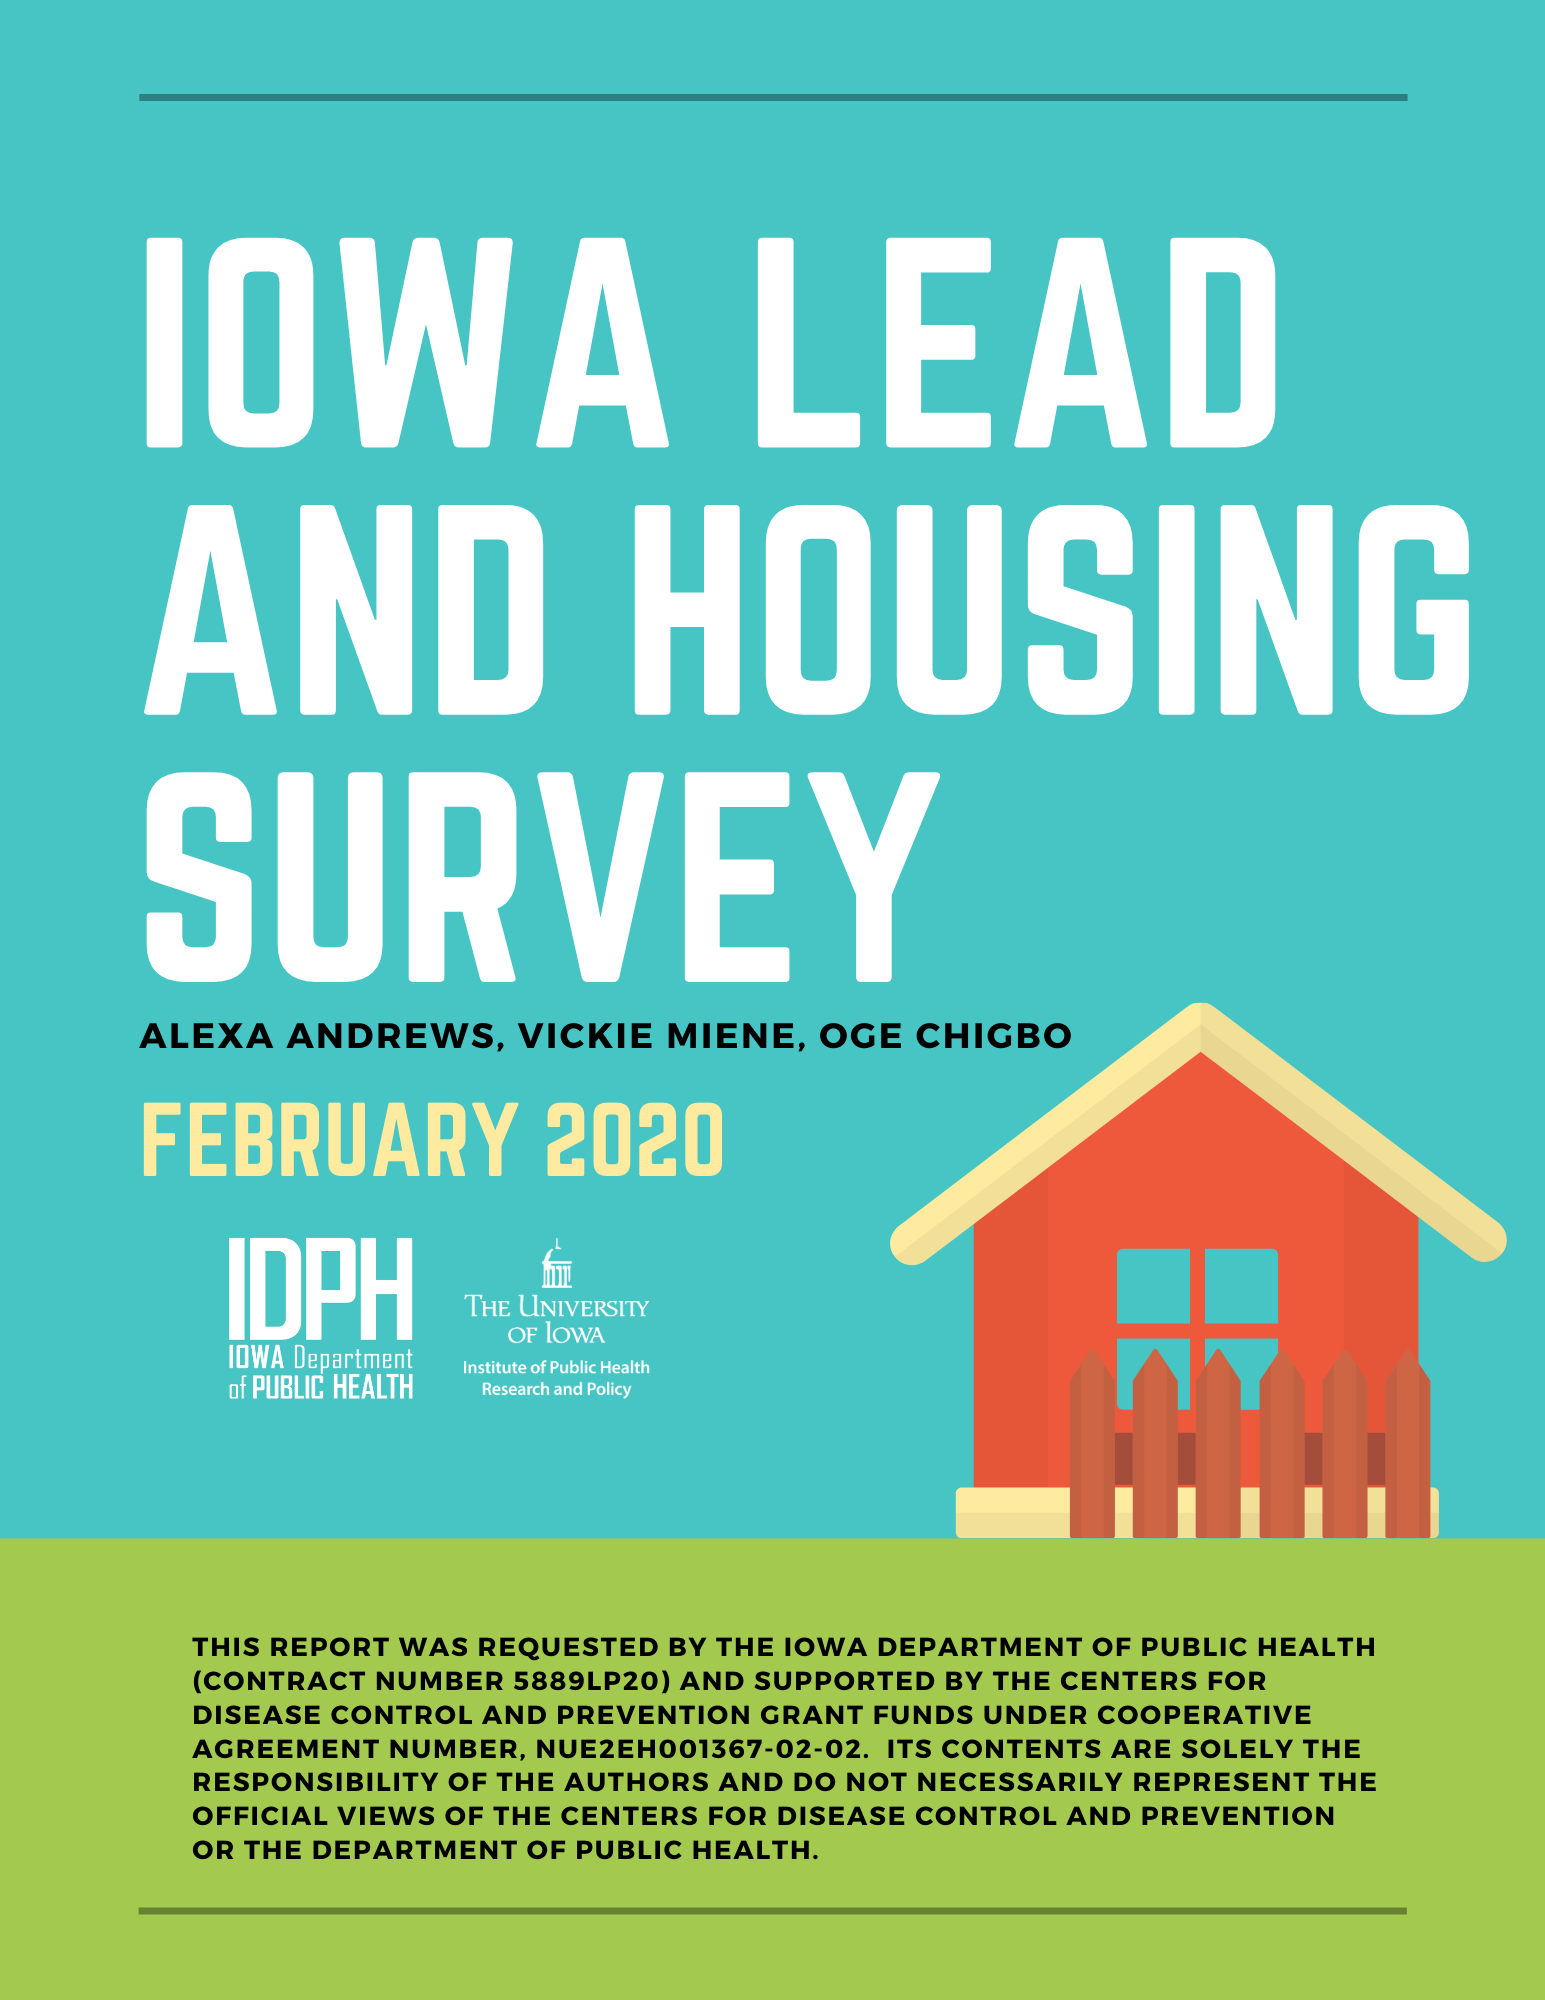 Iowa Lead and Housing Survey cover